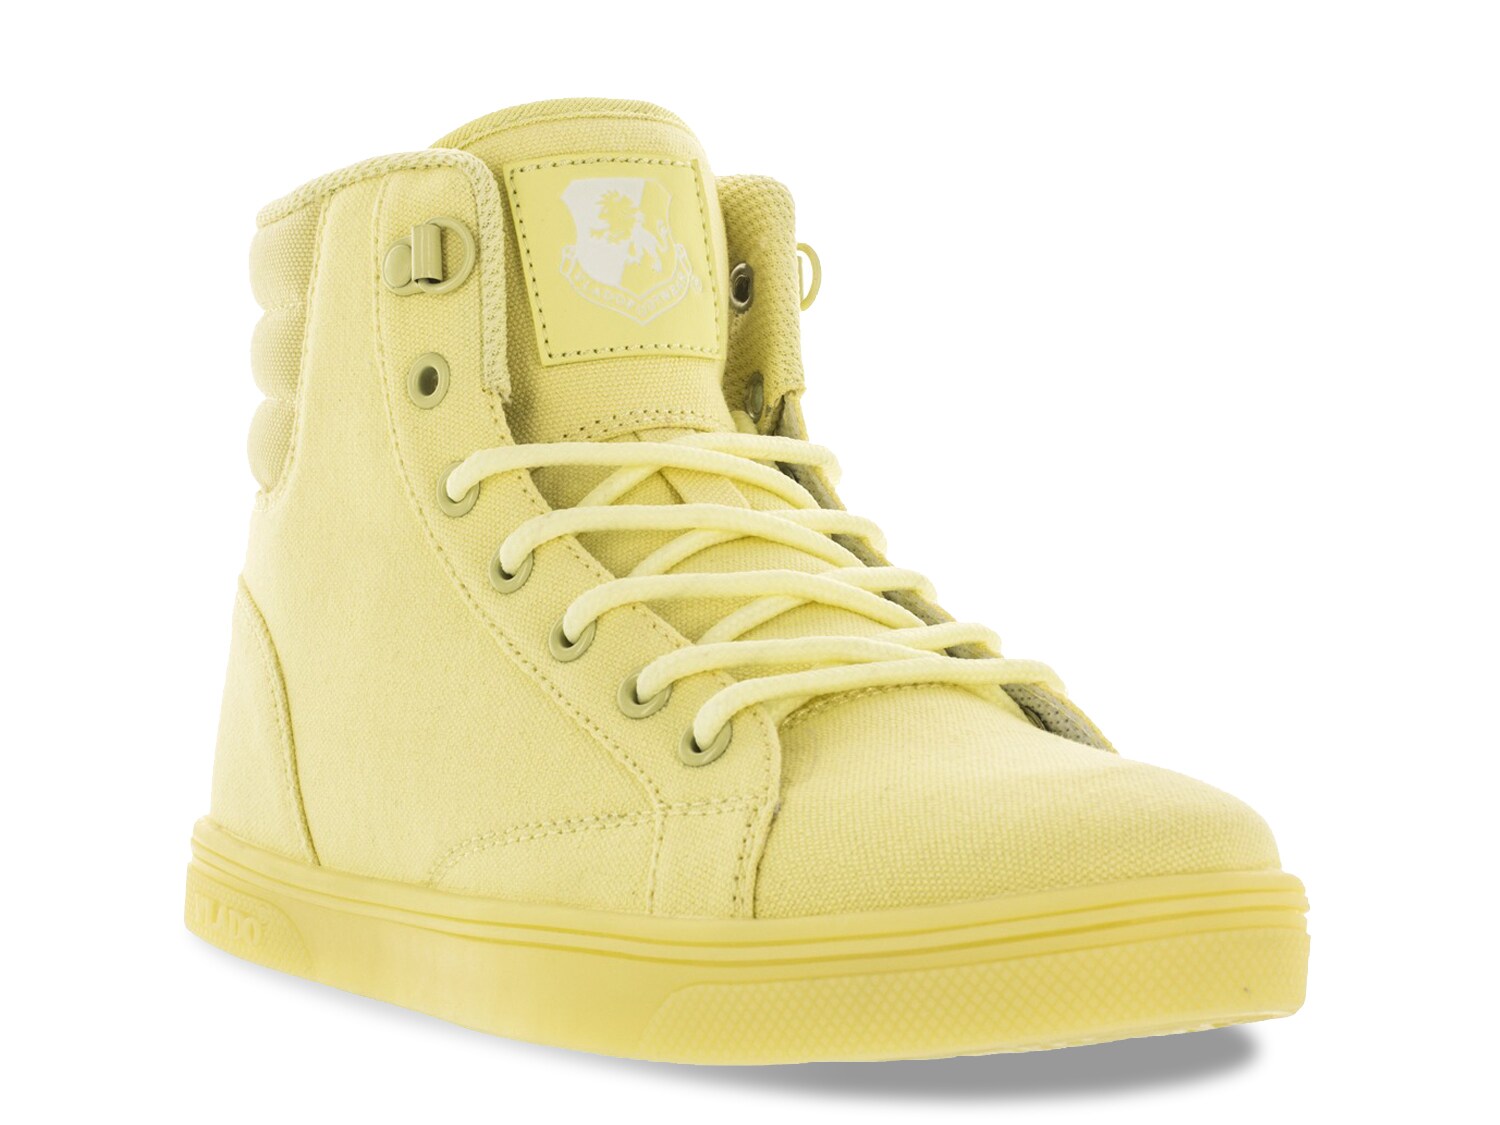 yellow high top tennis shoes